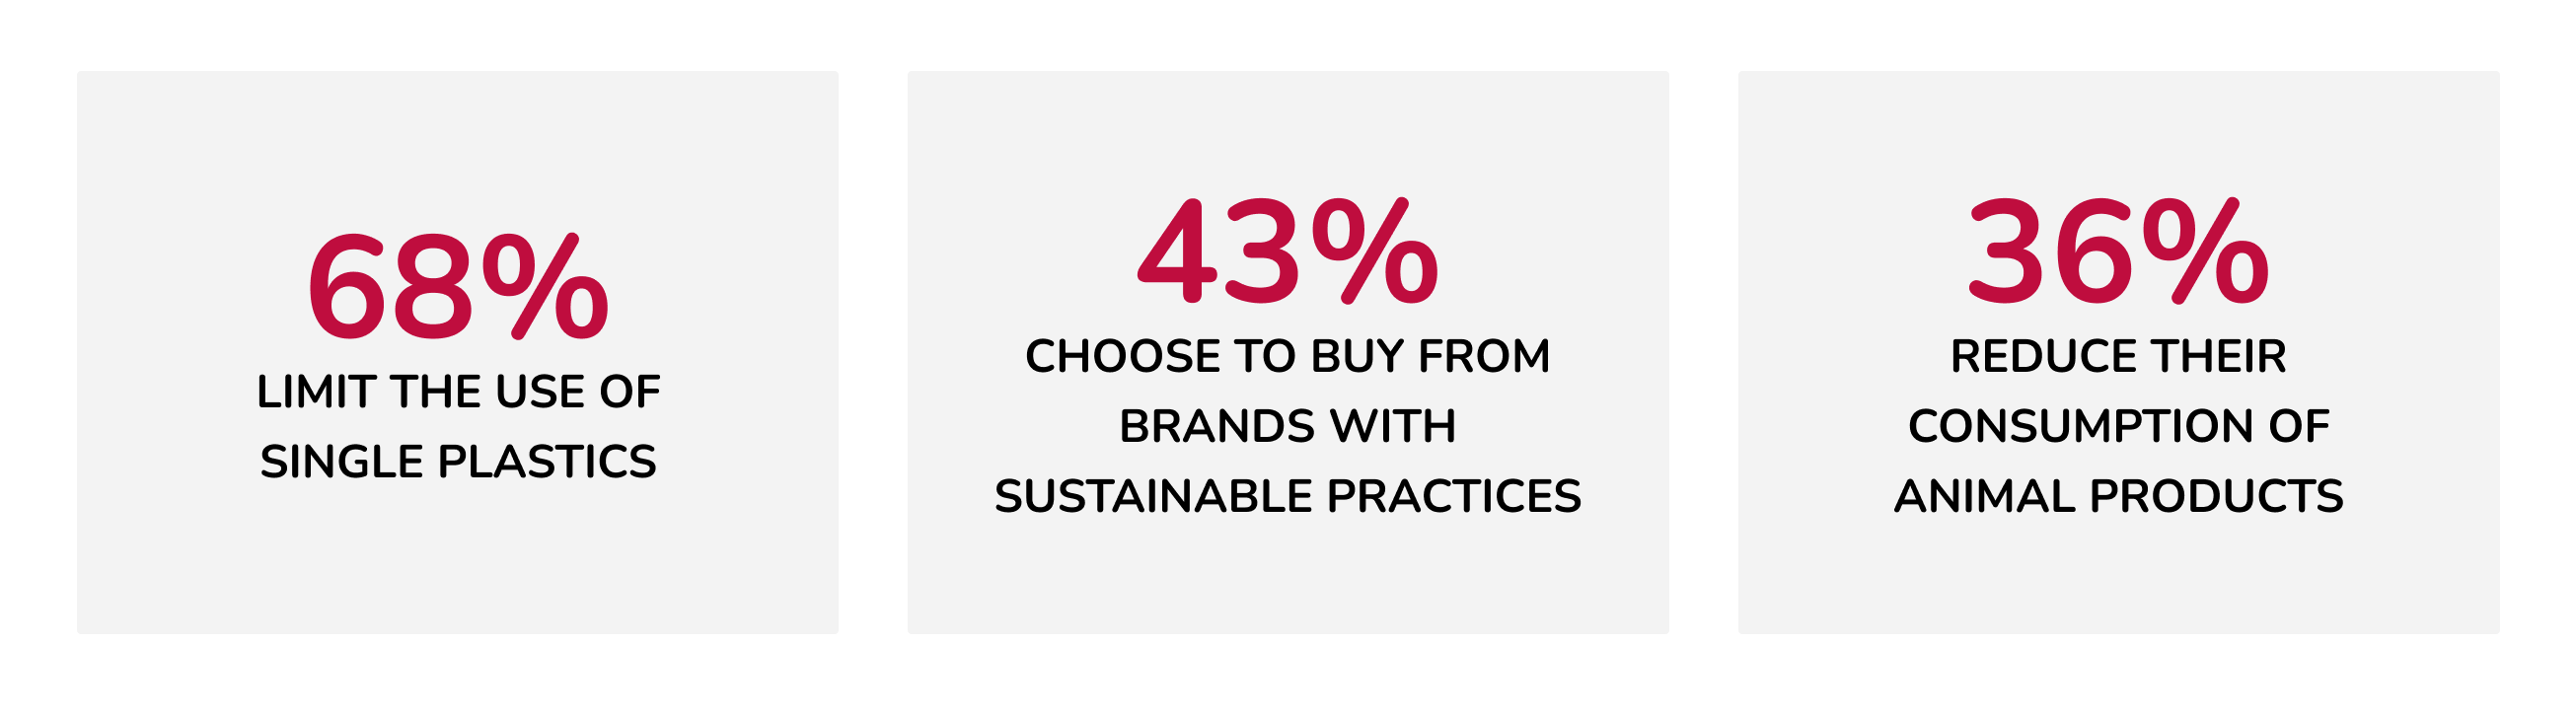 68% Limit the use of single plastics; 43% Choose to buy from brands with sustainable practices; 36% Reduce their consumption of animal products